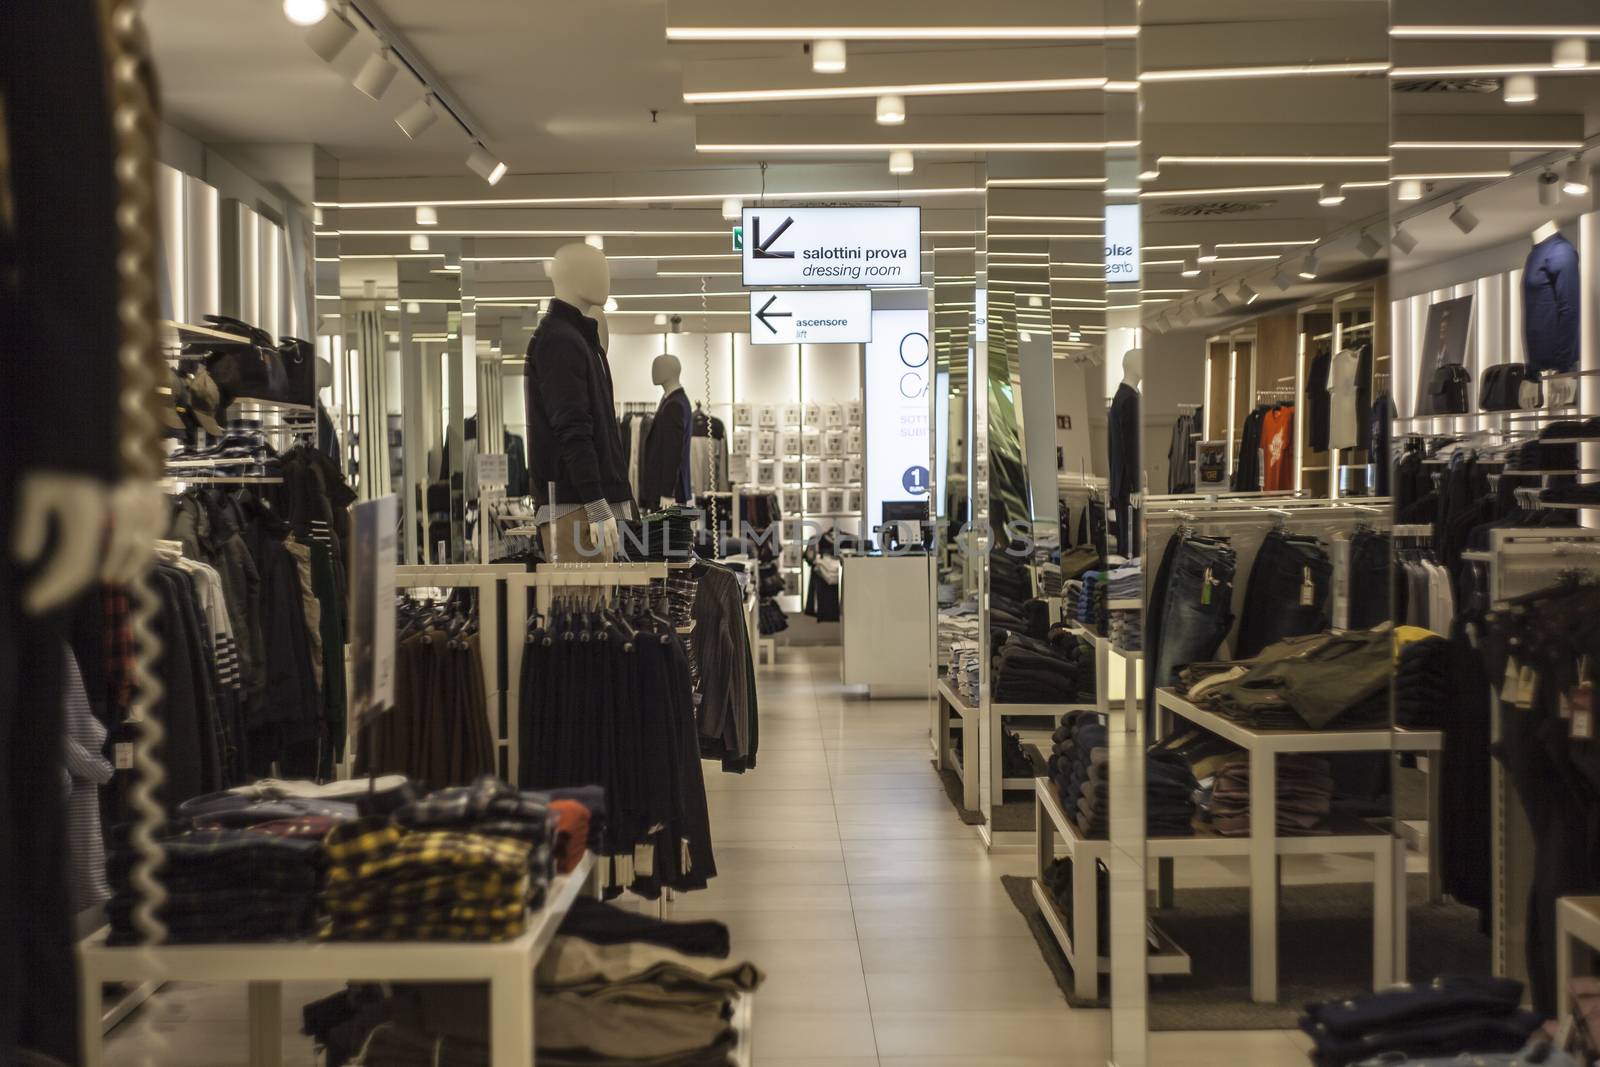 Interior of a clothing store with many tipes of dresses